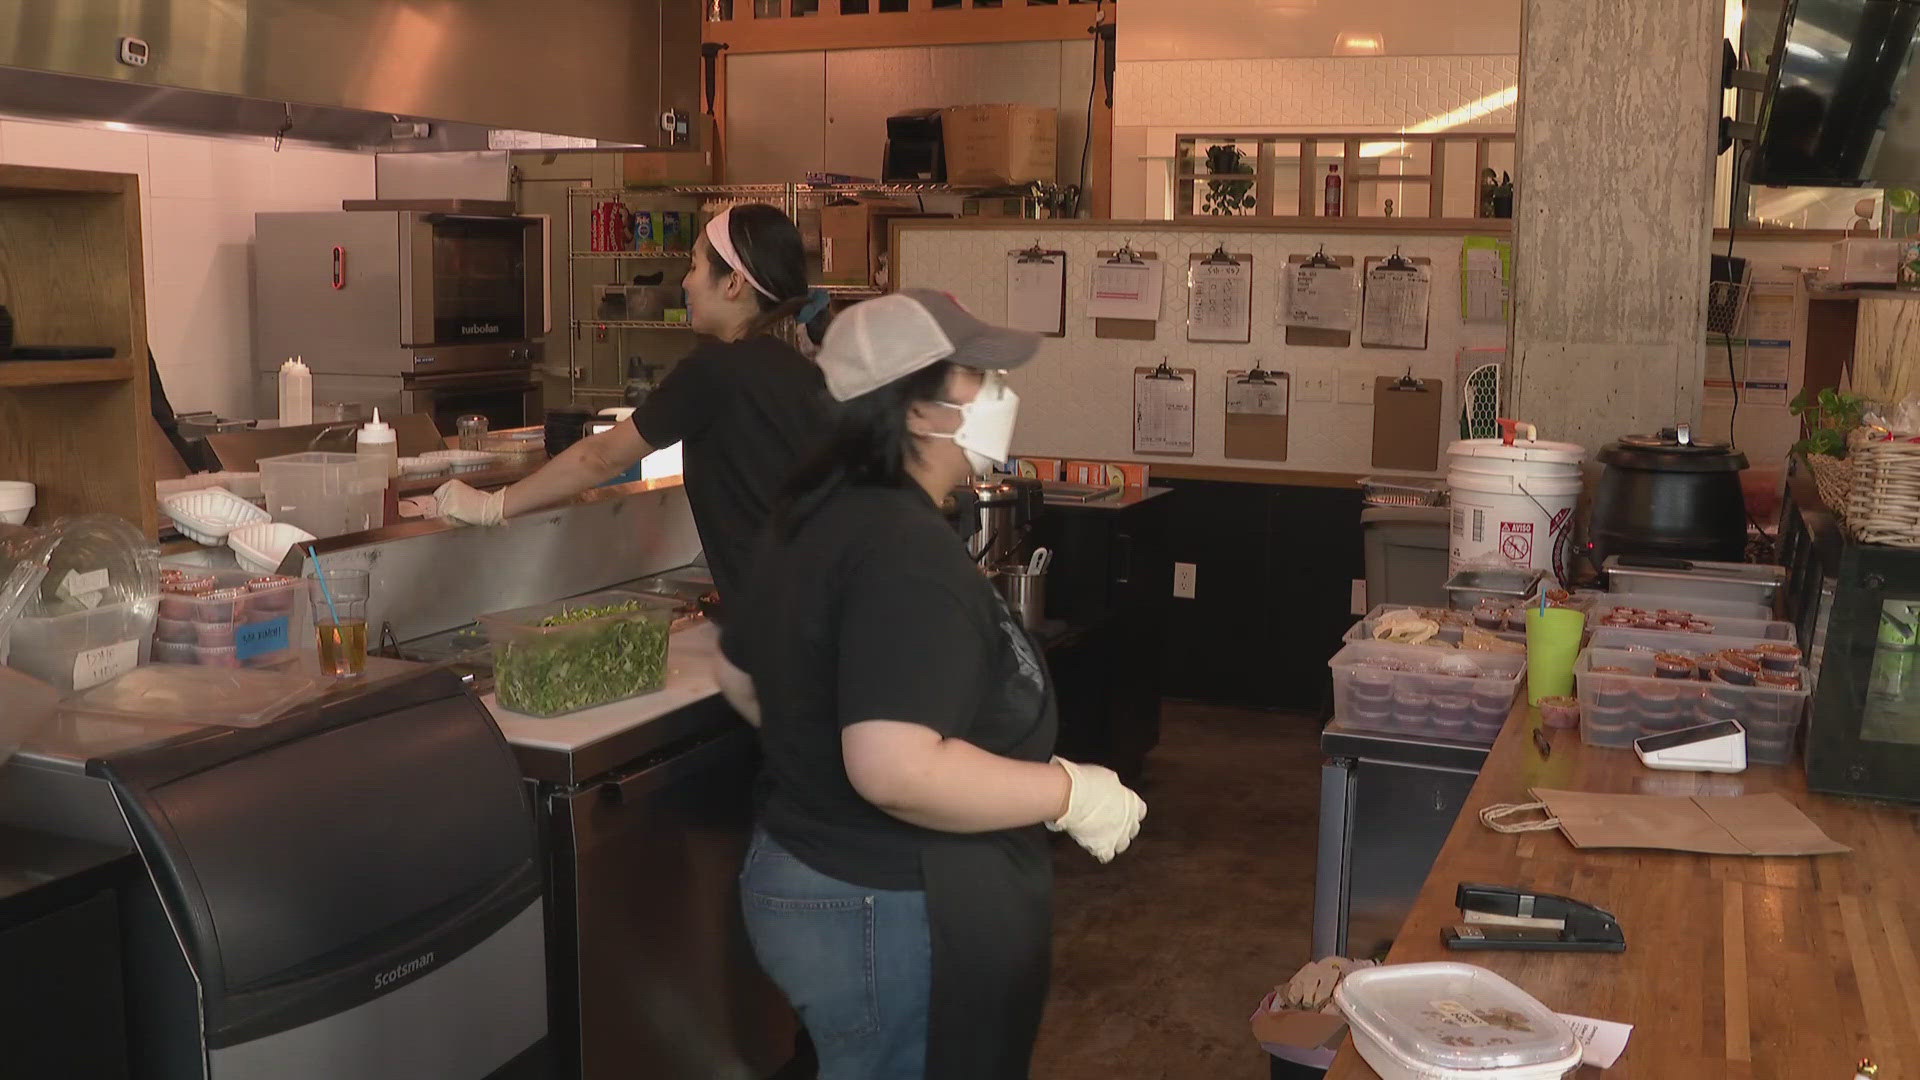 The Seattle City Council has not acted on a proposed compromise bill set forth in part by food delivery apps, and time is up for local restaurants.